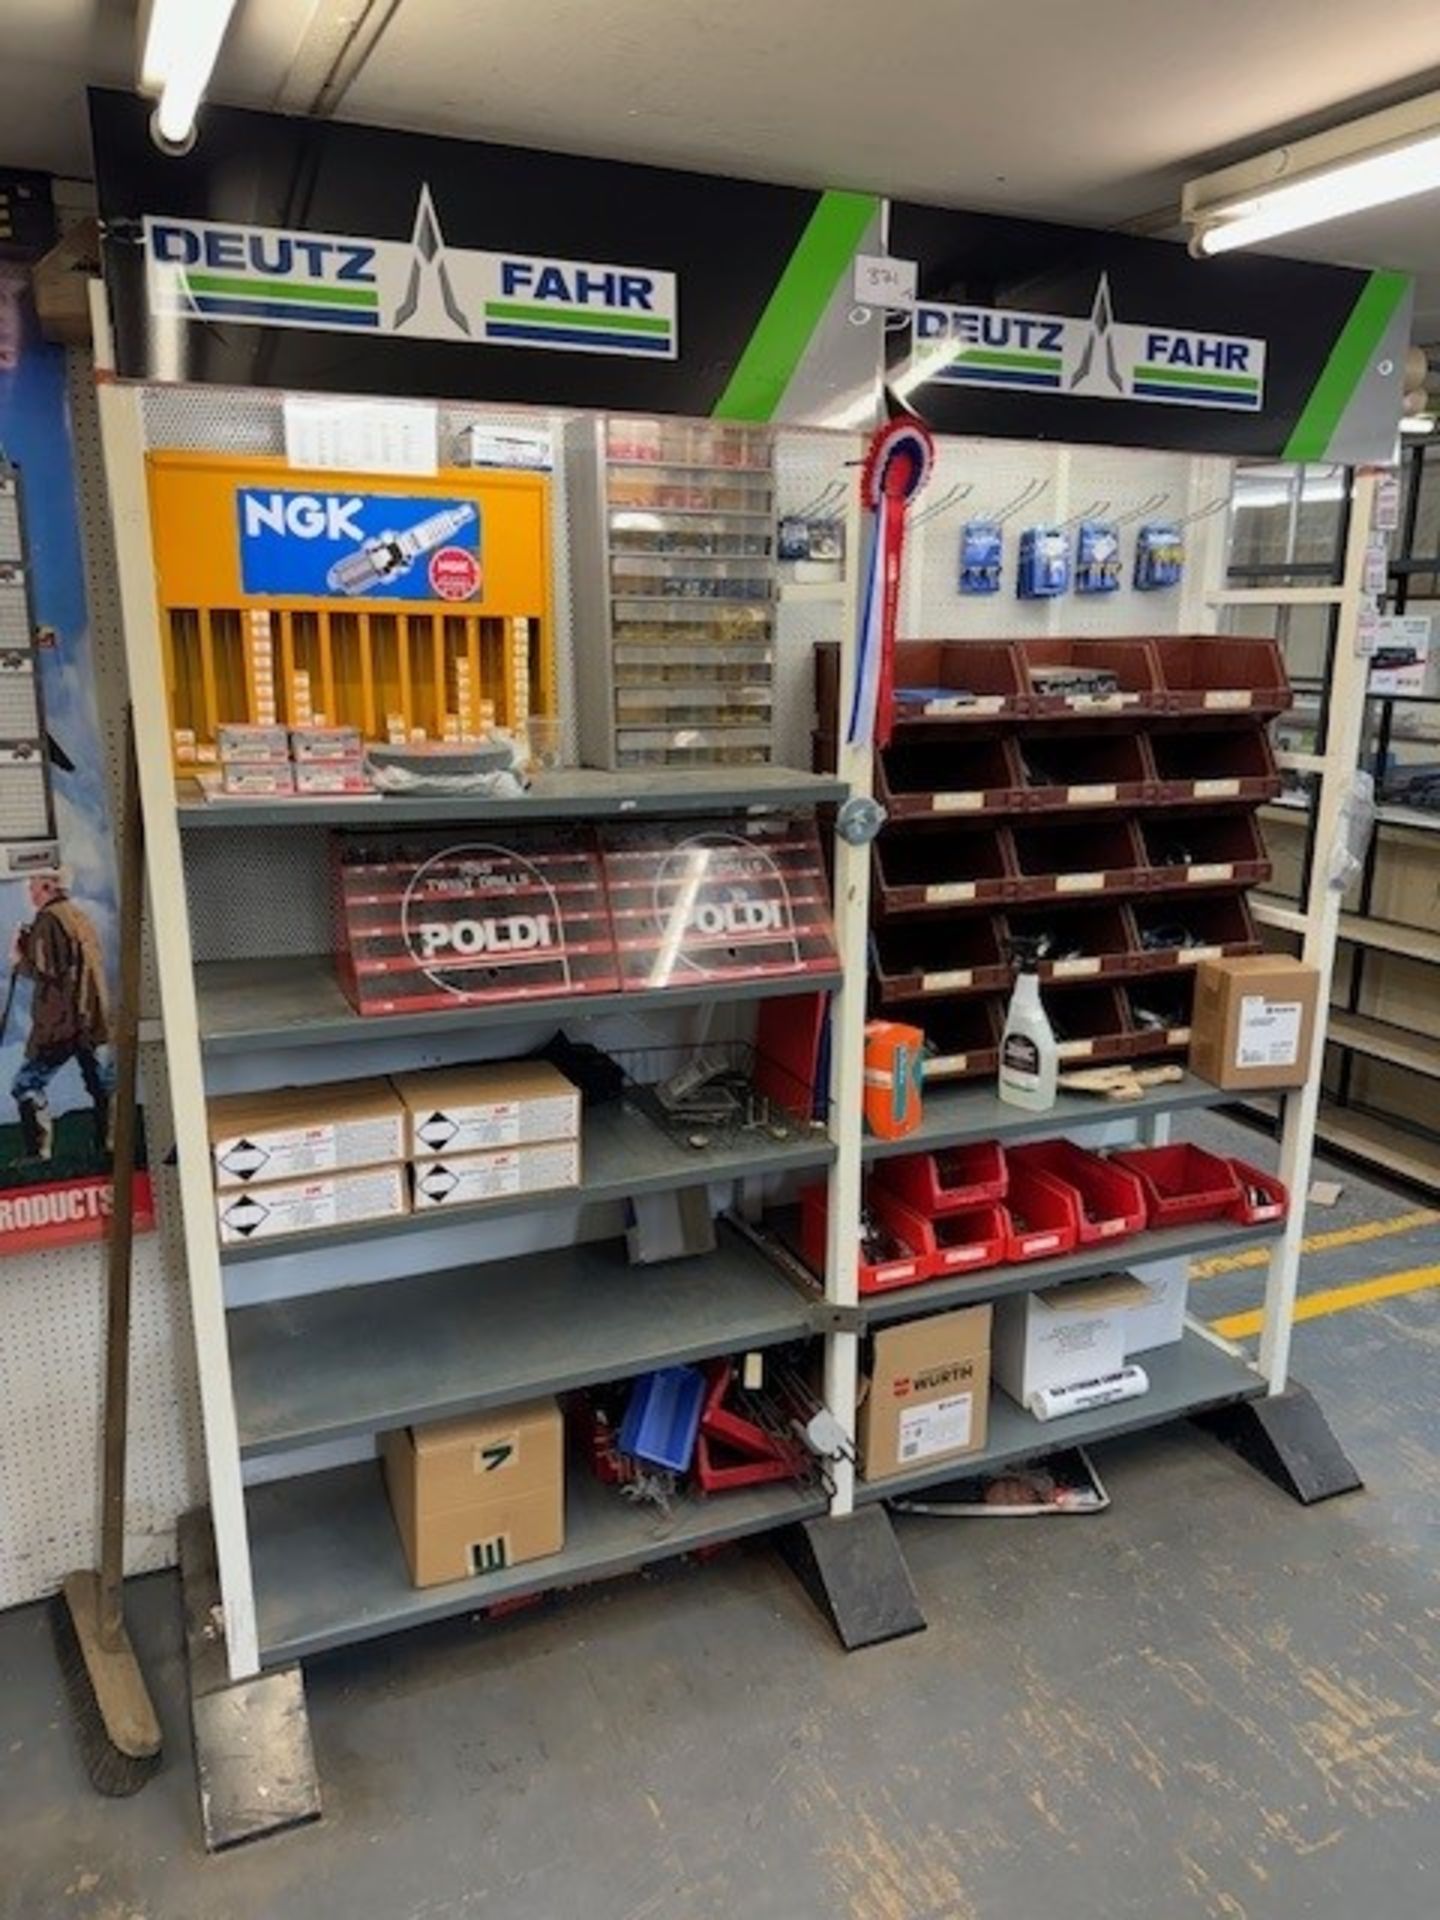 2: Shop Display Units & Contents to Include NAK Spark Plugs & Display, Poldi HSS Drill Bits & Displa